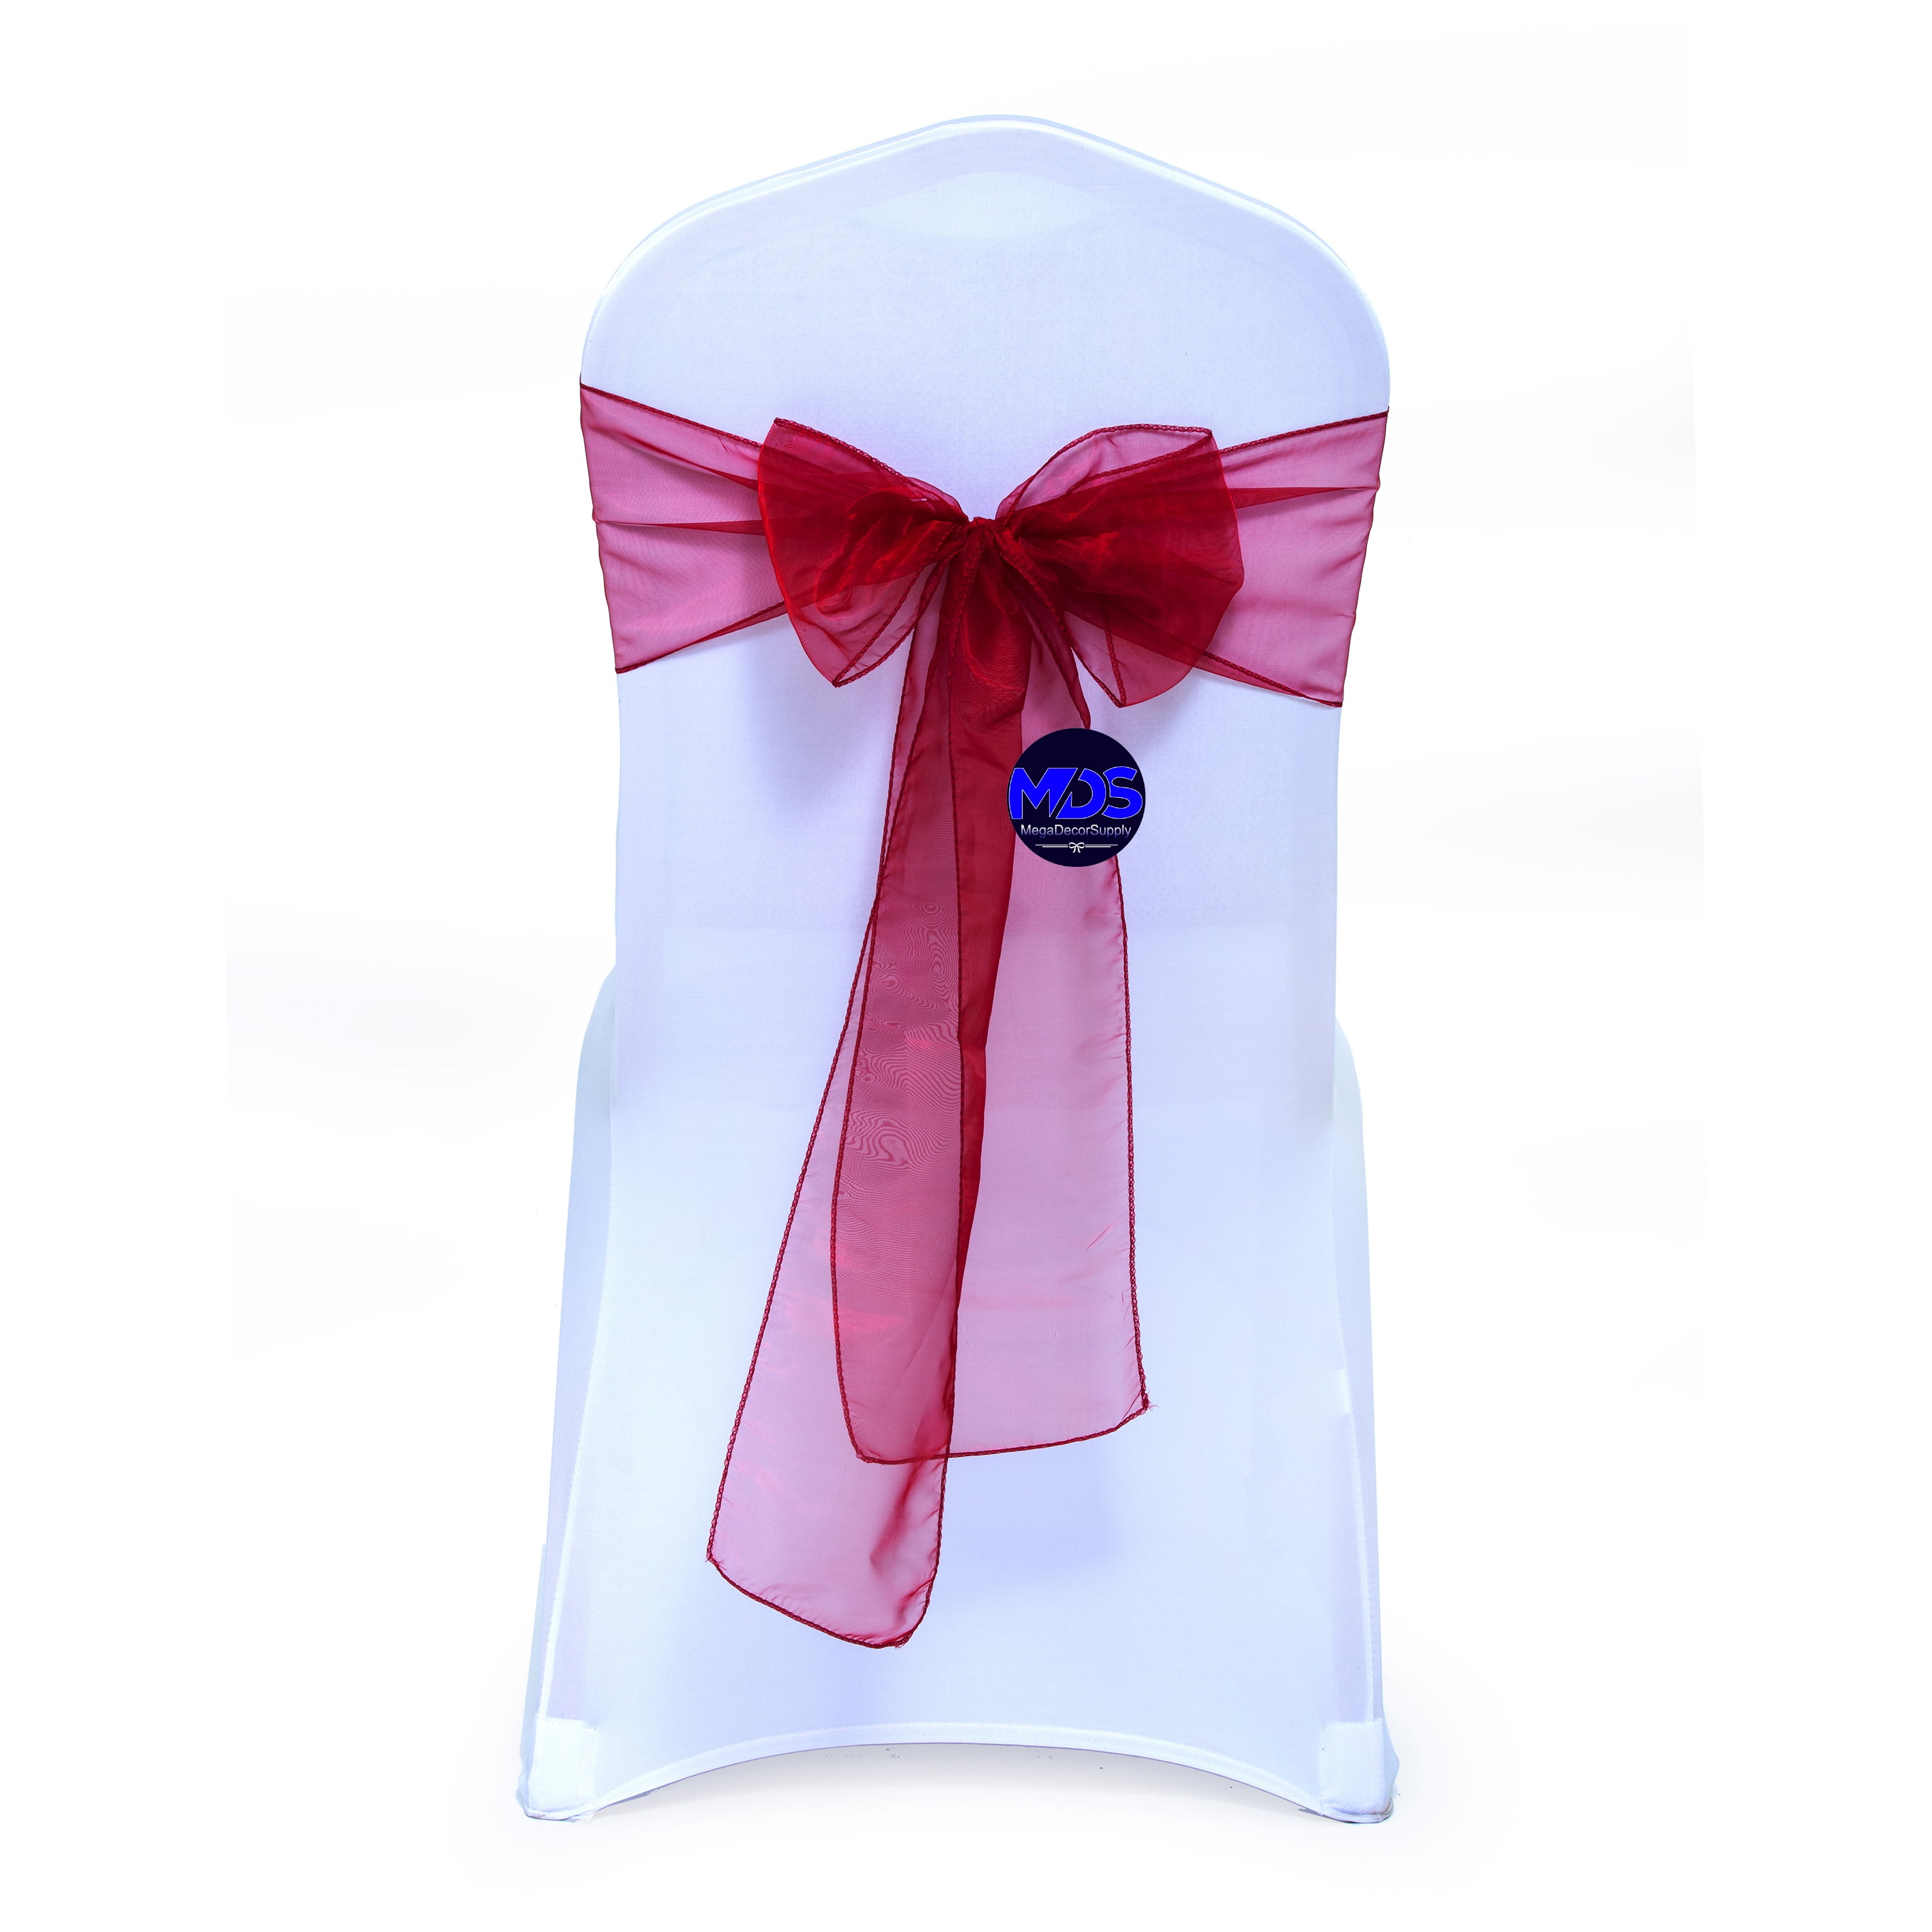 25 Organza Chair Sashes Bows Tie Knot Wedding Party Banquet Decoration FREE SHIP 